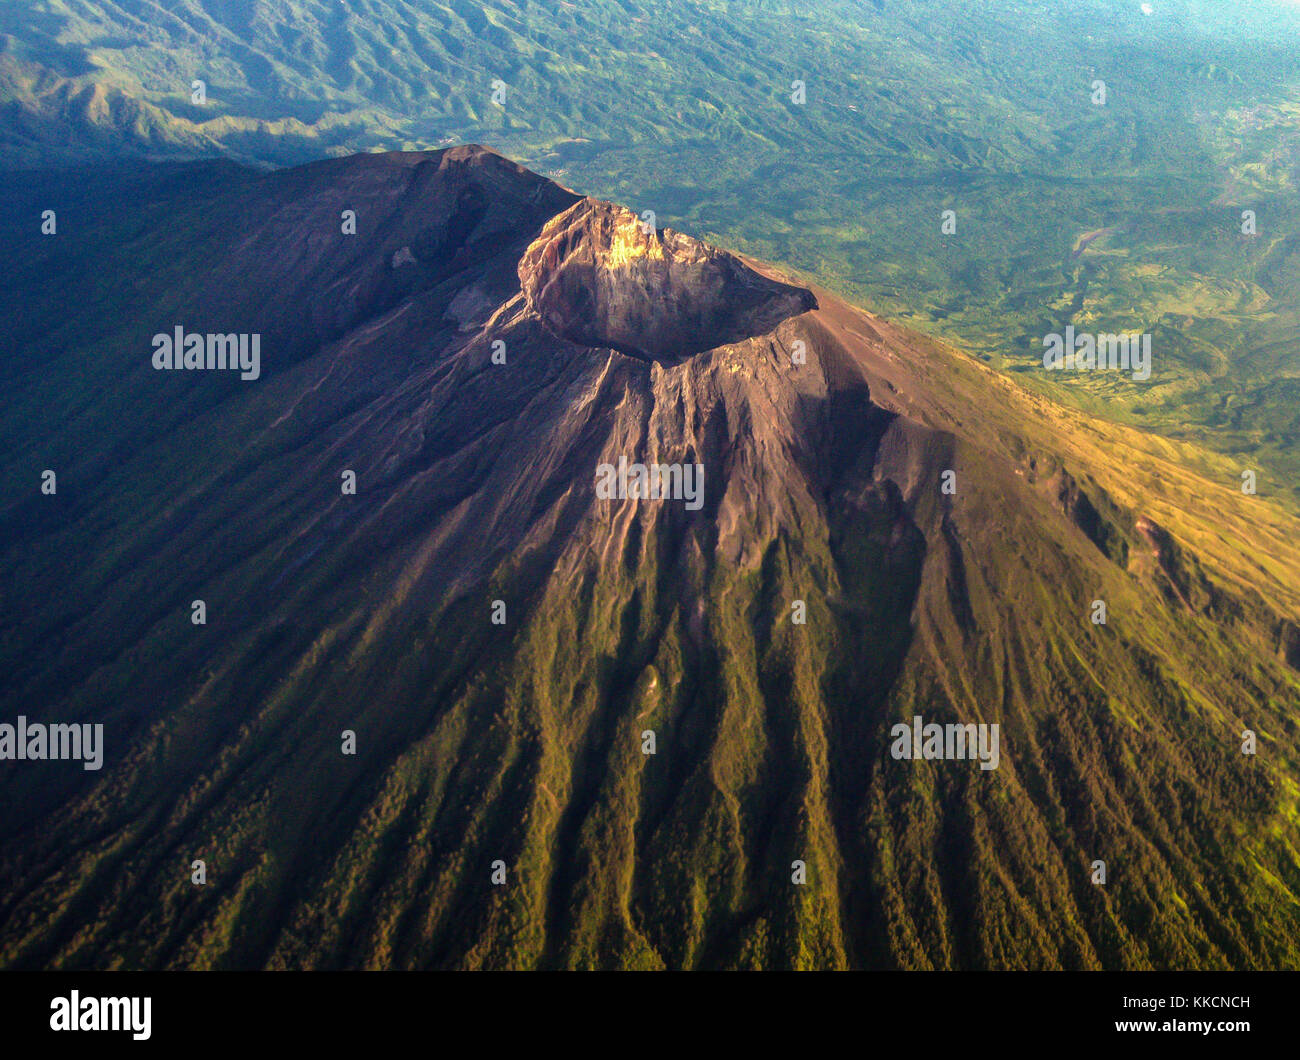 The crater of mount Agung as seen from airplane window with mount Abang and mount Batur in the background. Stock Photo